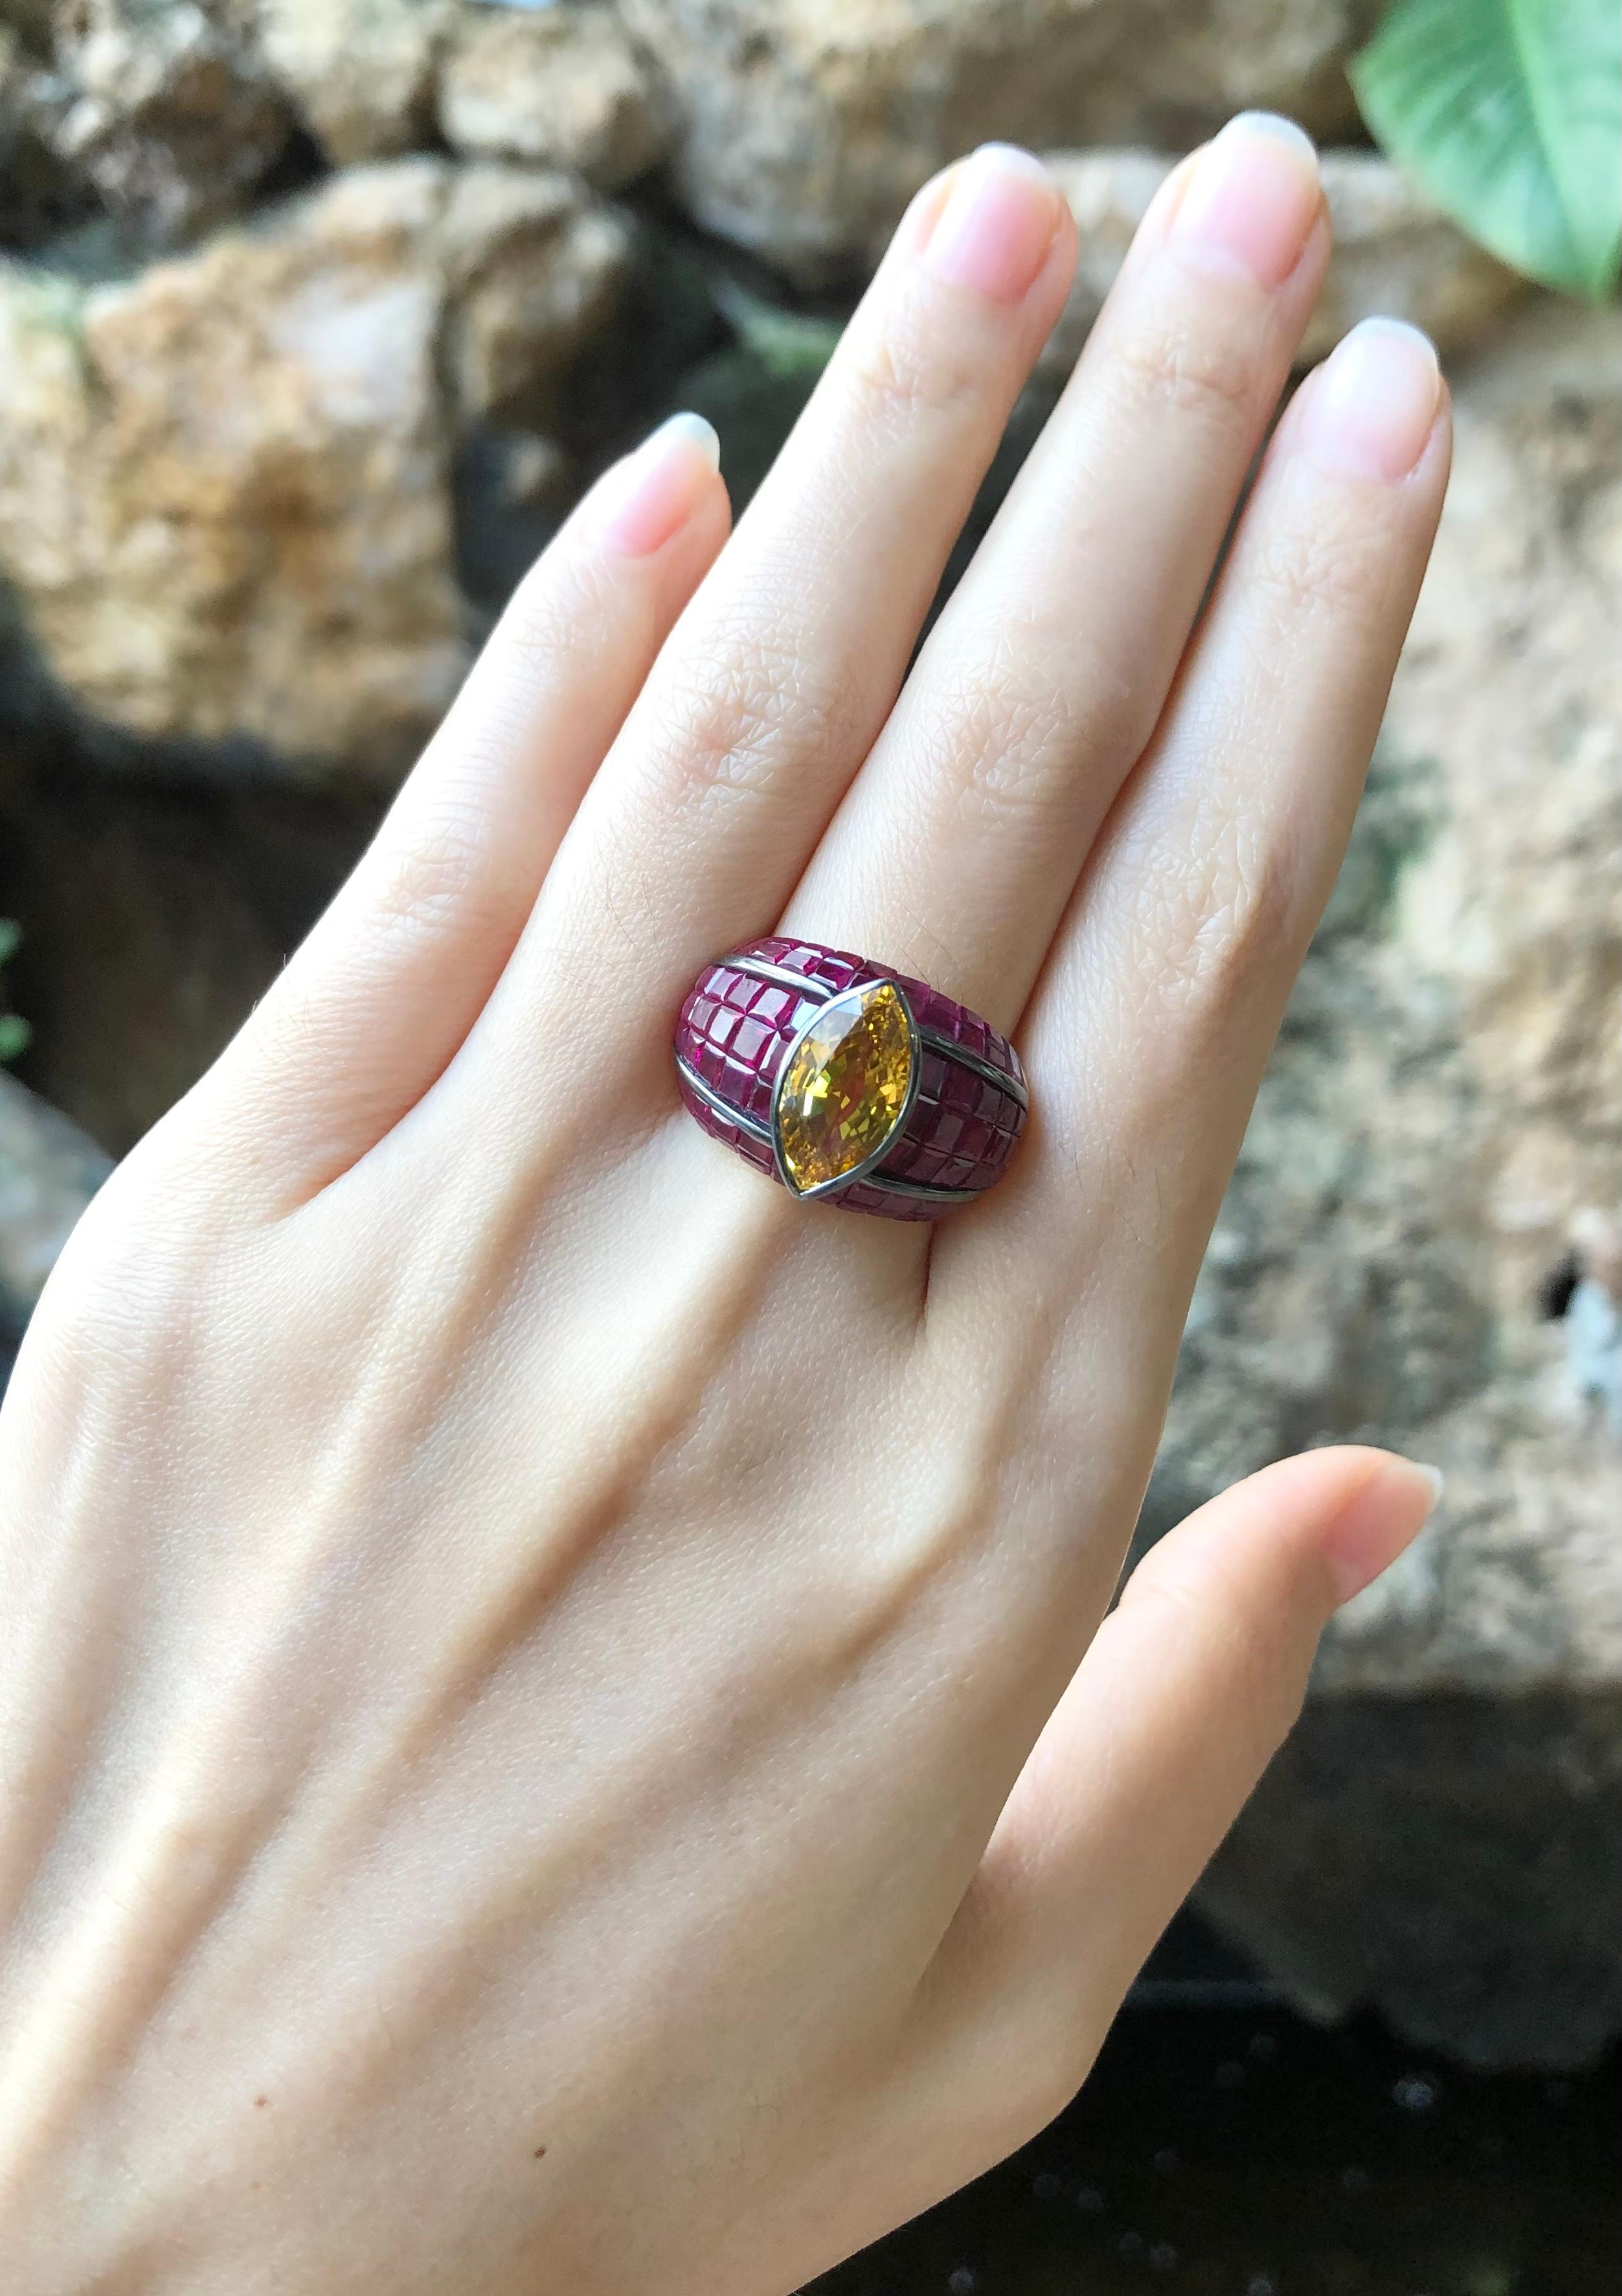 Yellow Sapphire 3.99 carats with Ruby 11.42 carats Ring set in 18 Karat Gold Settings

Width:  0.8 cm 
Length: 1.4 cm
Ring Size: 55
Total Weight: 15.28 grams


